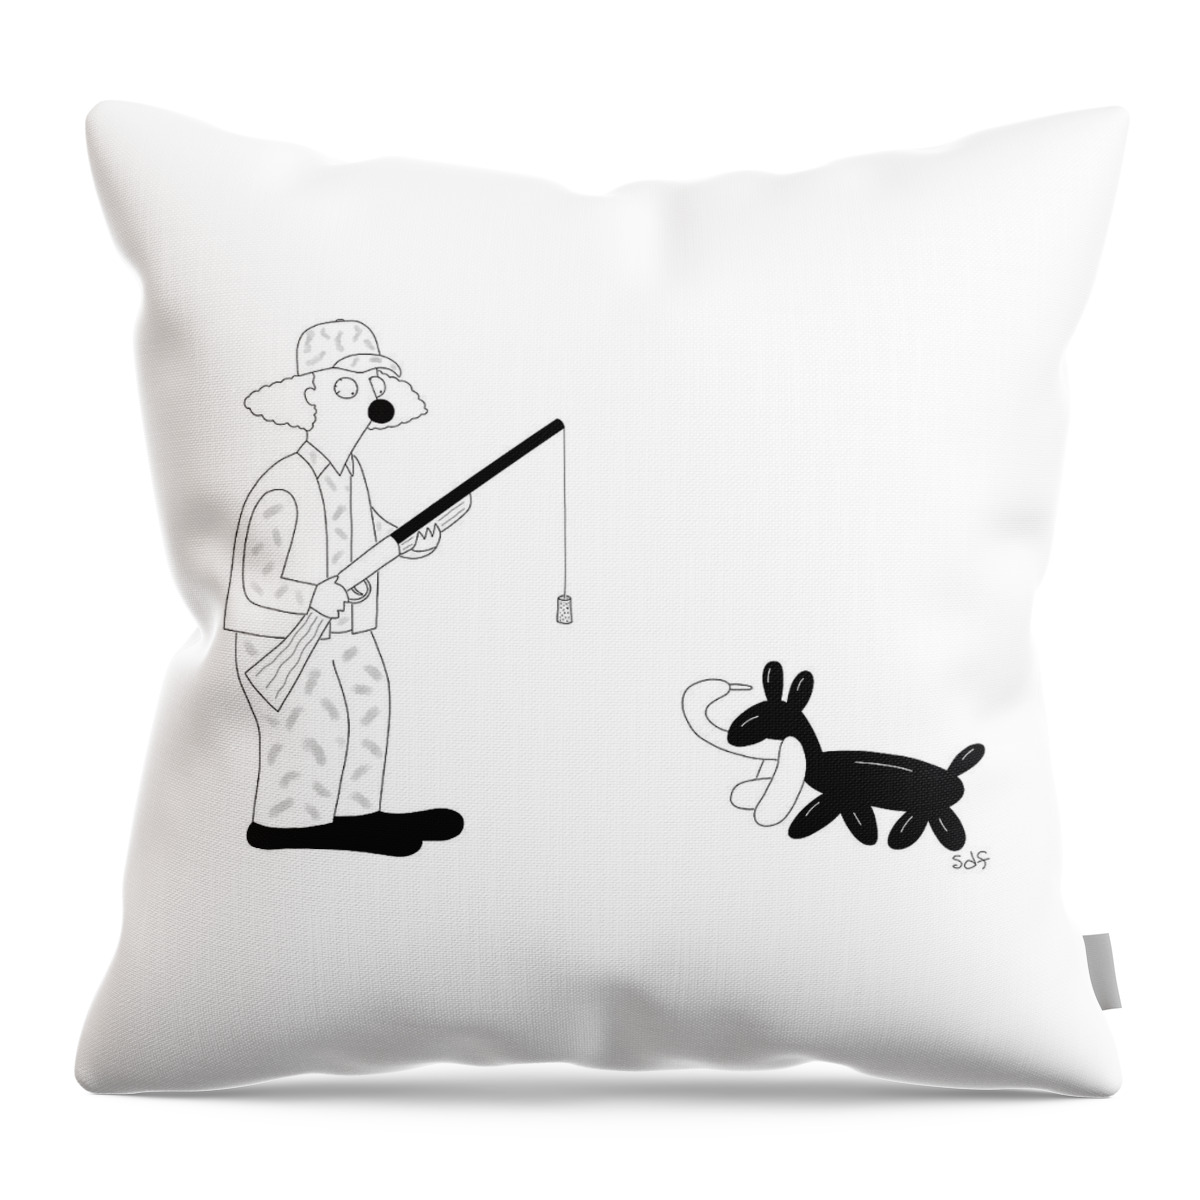 New Yorker March 6, 2023 Throw Pillow